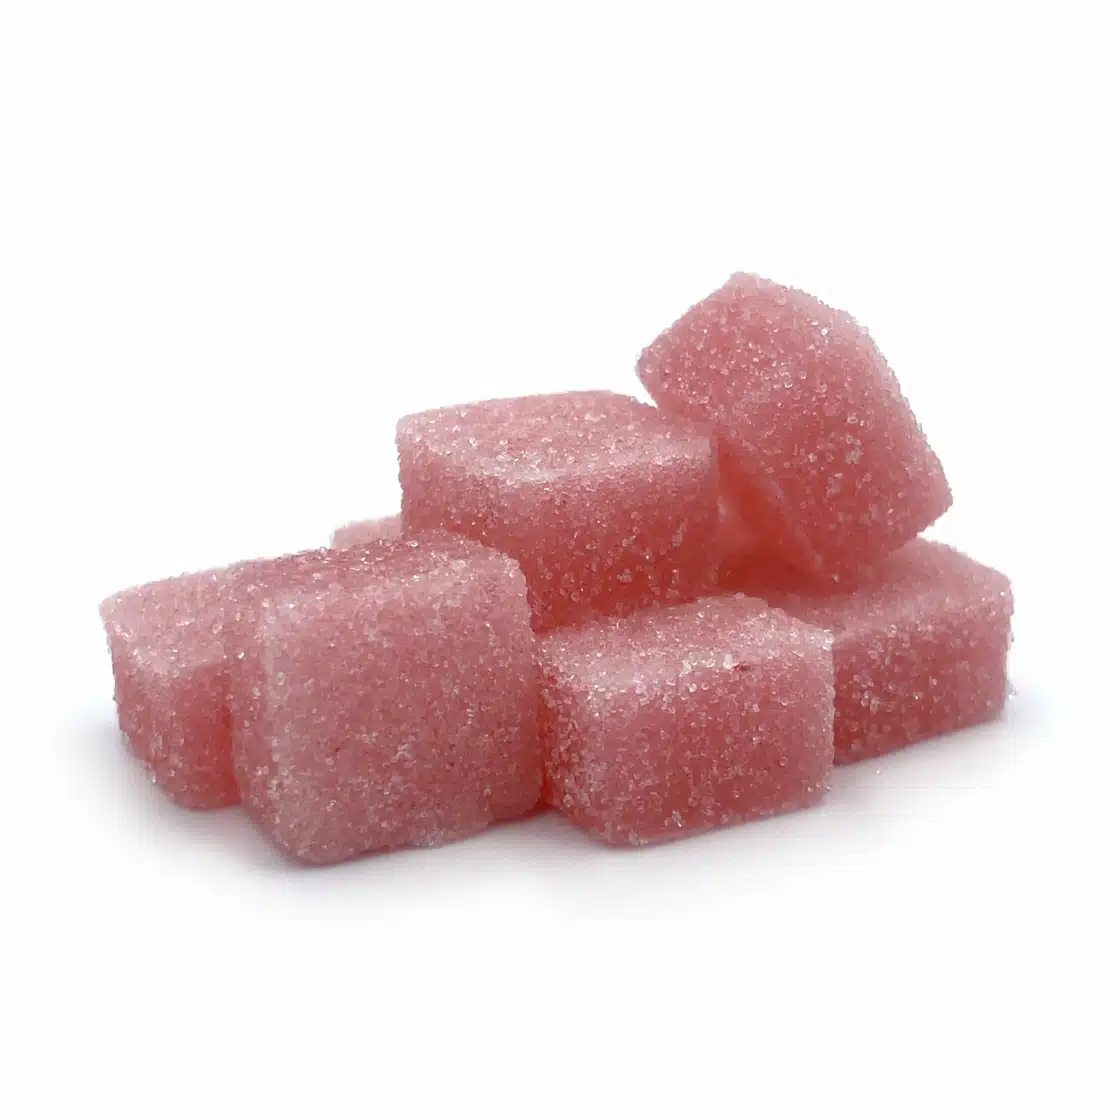 Mayday Sour Watermelon 400mg